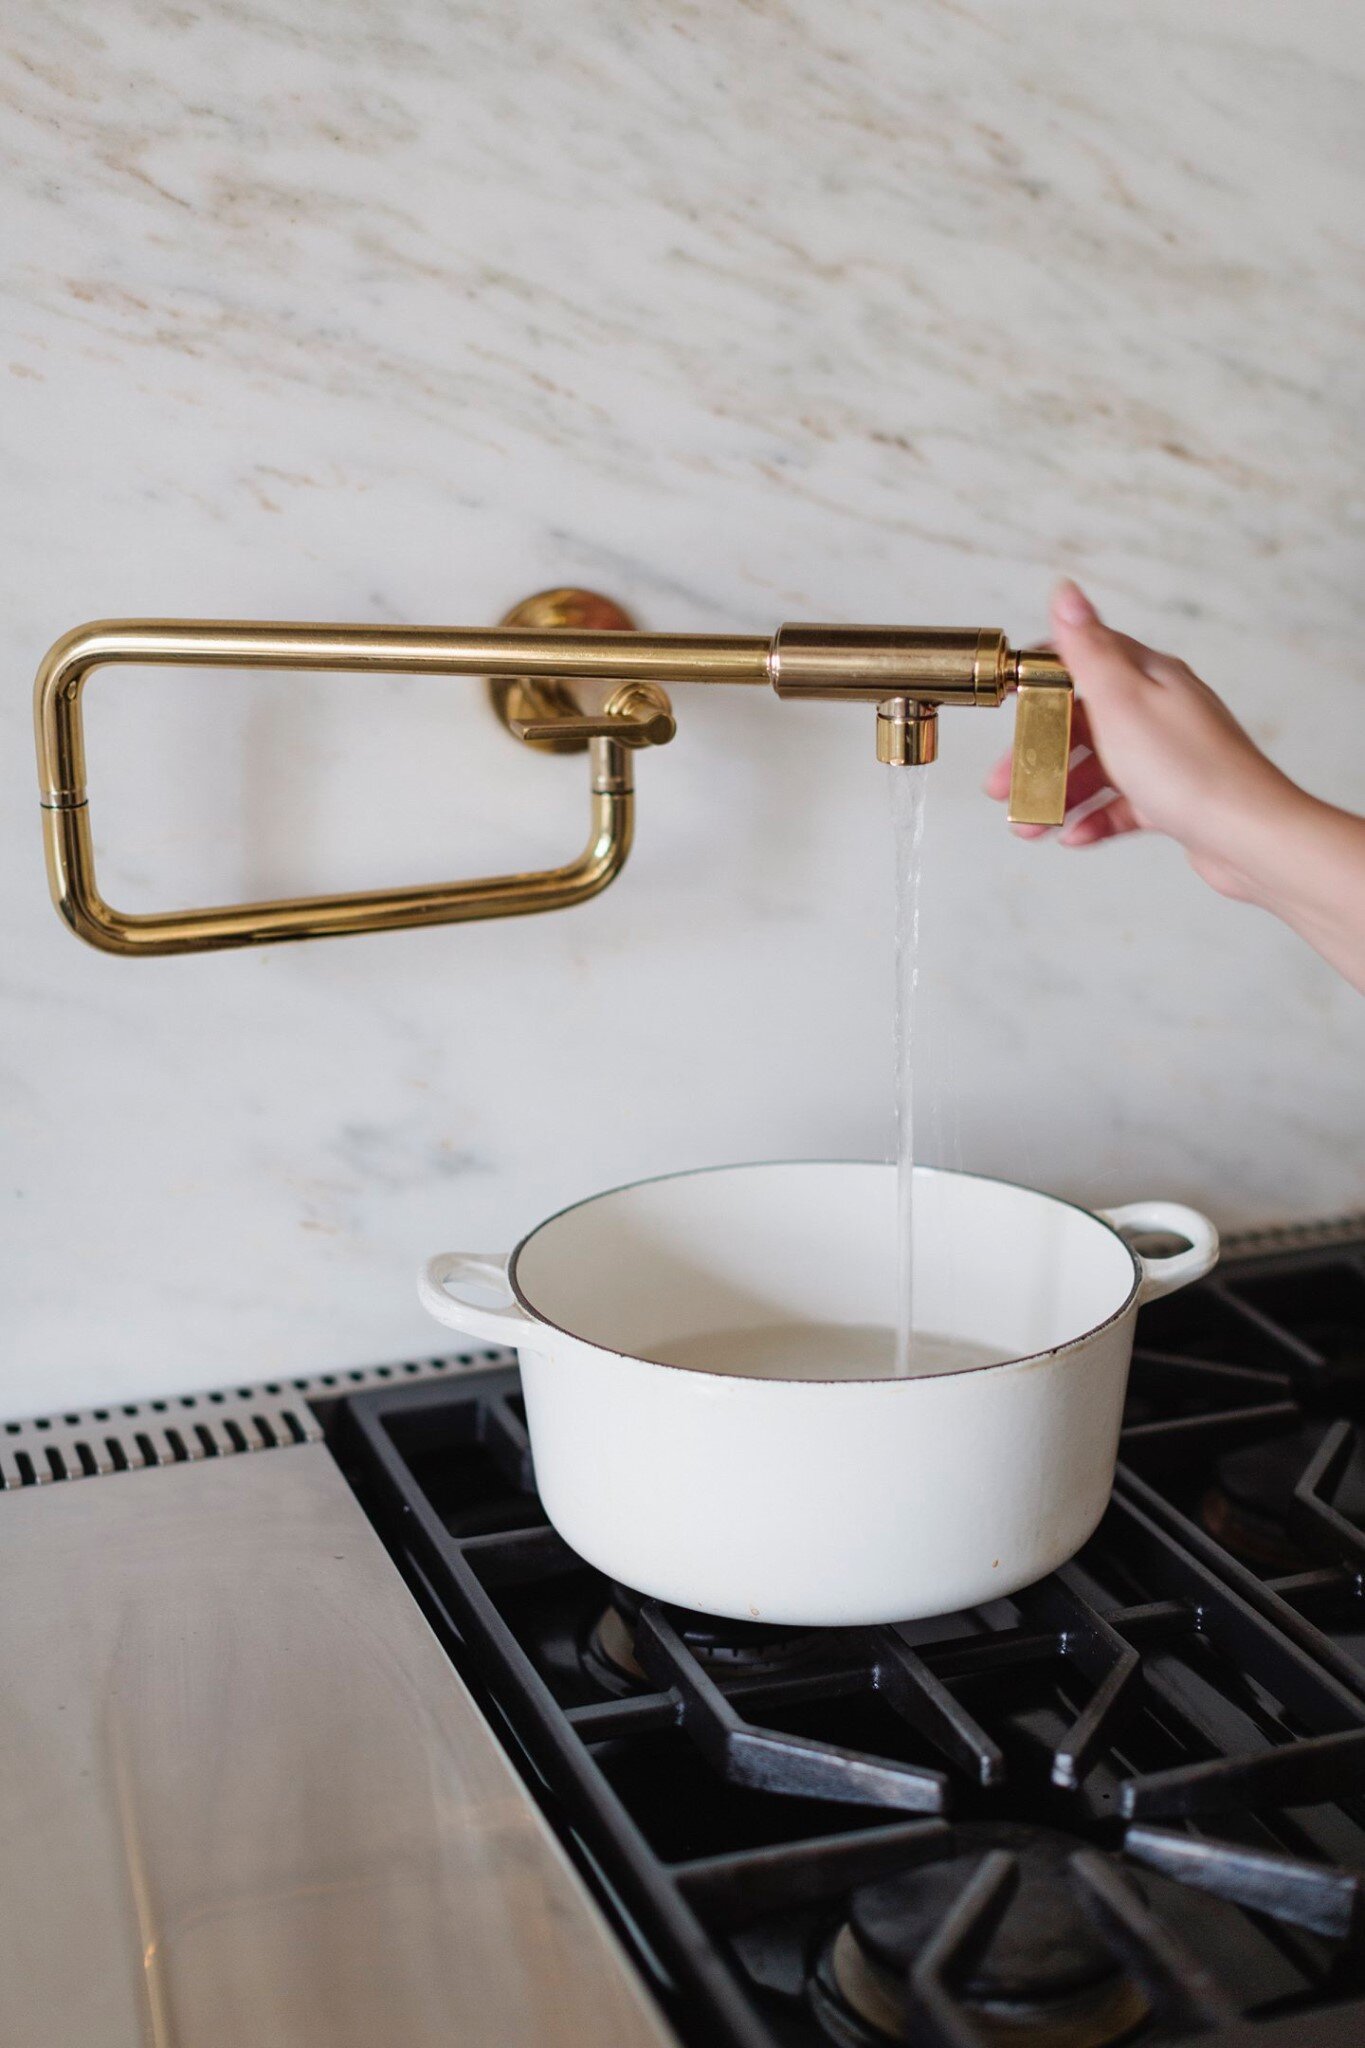 Reasons Not To Include A Pot Filler In Your New Kitchen Design